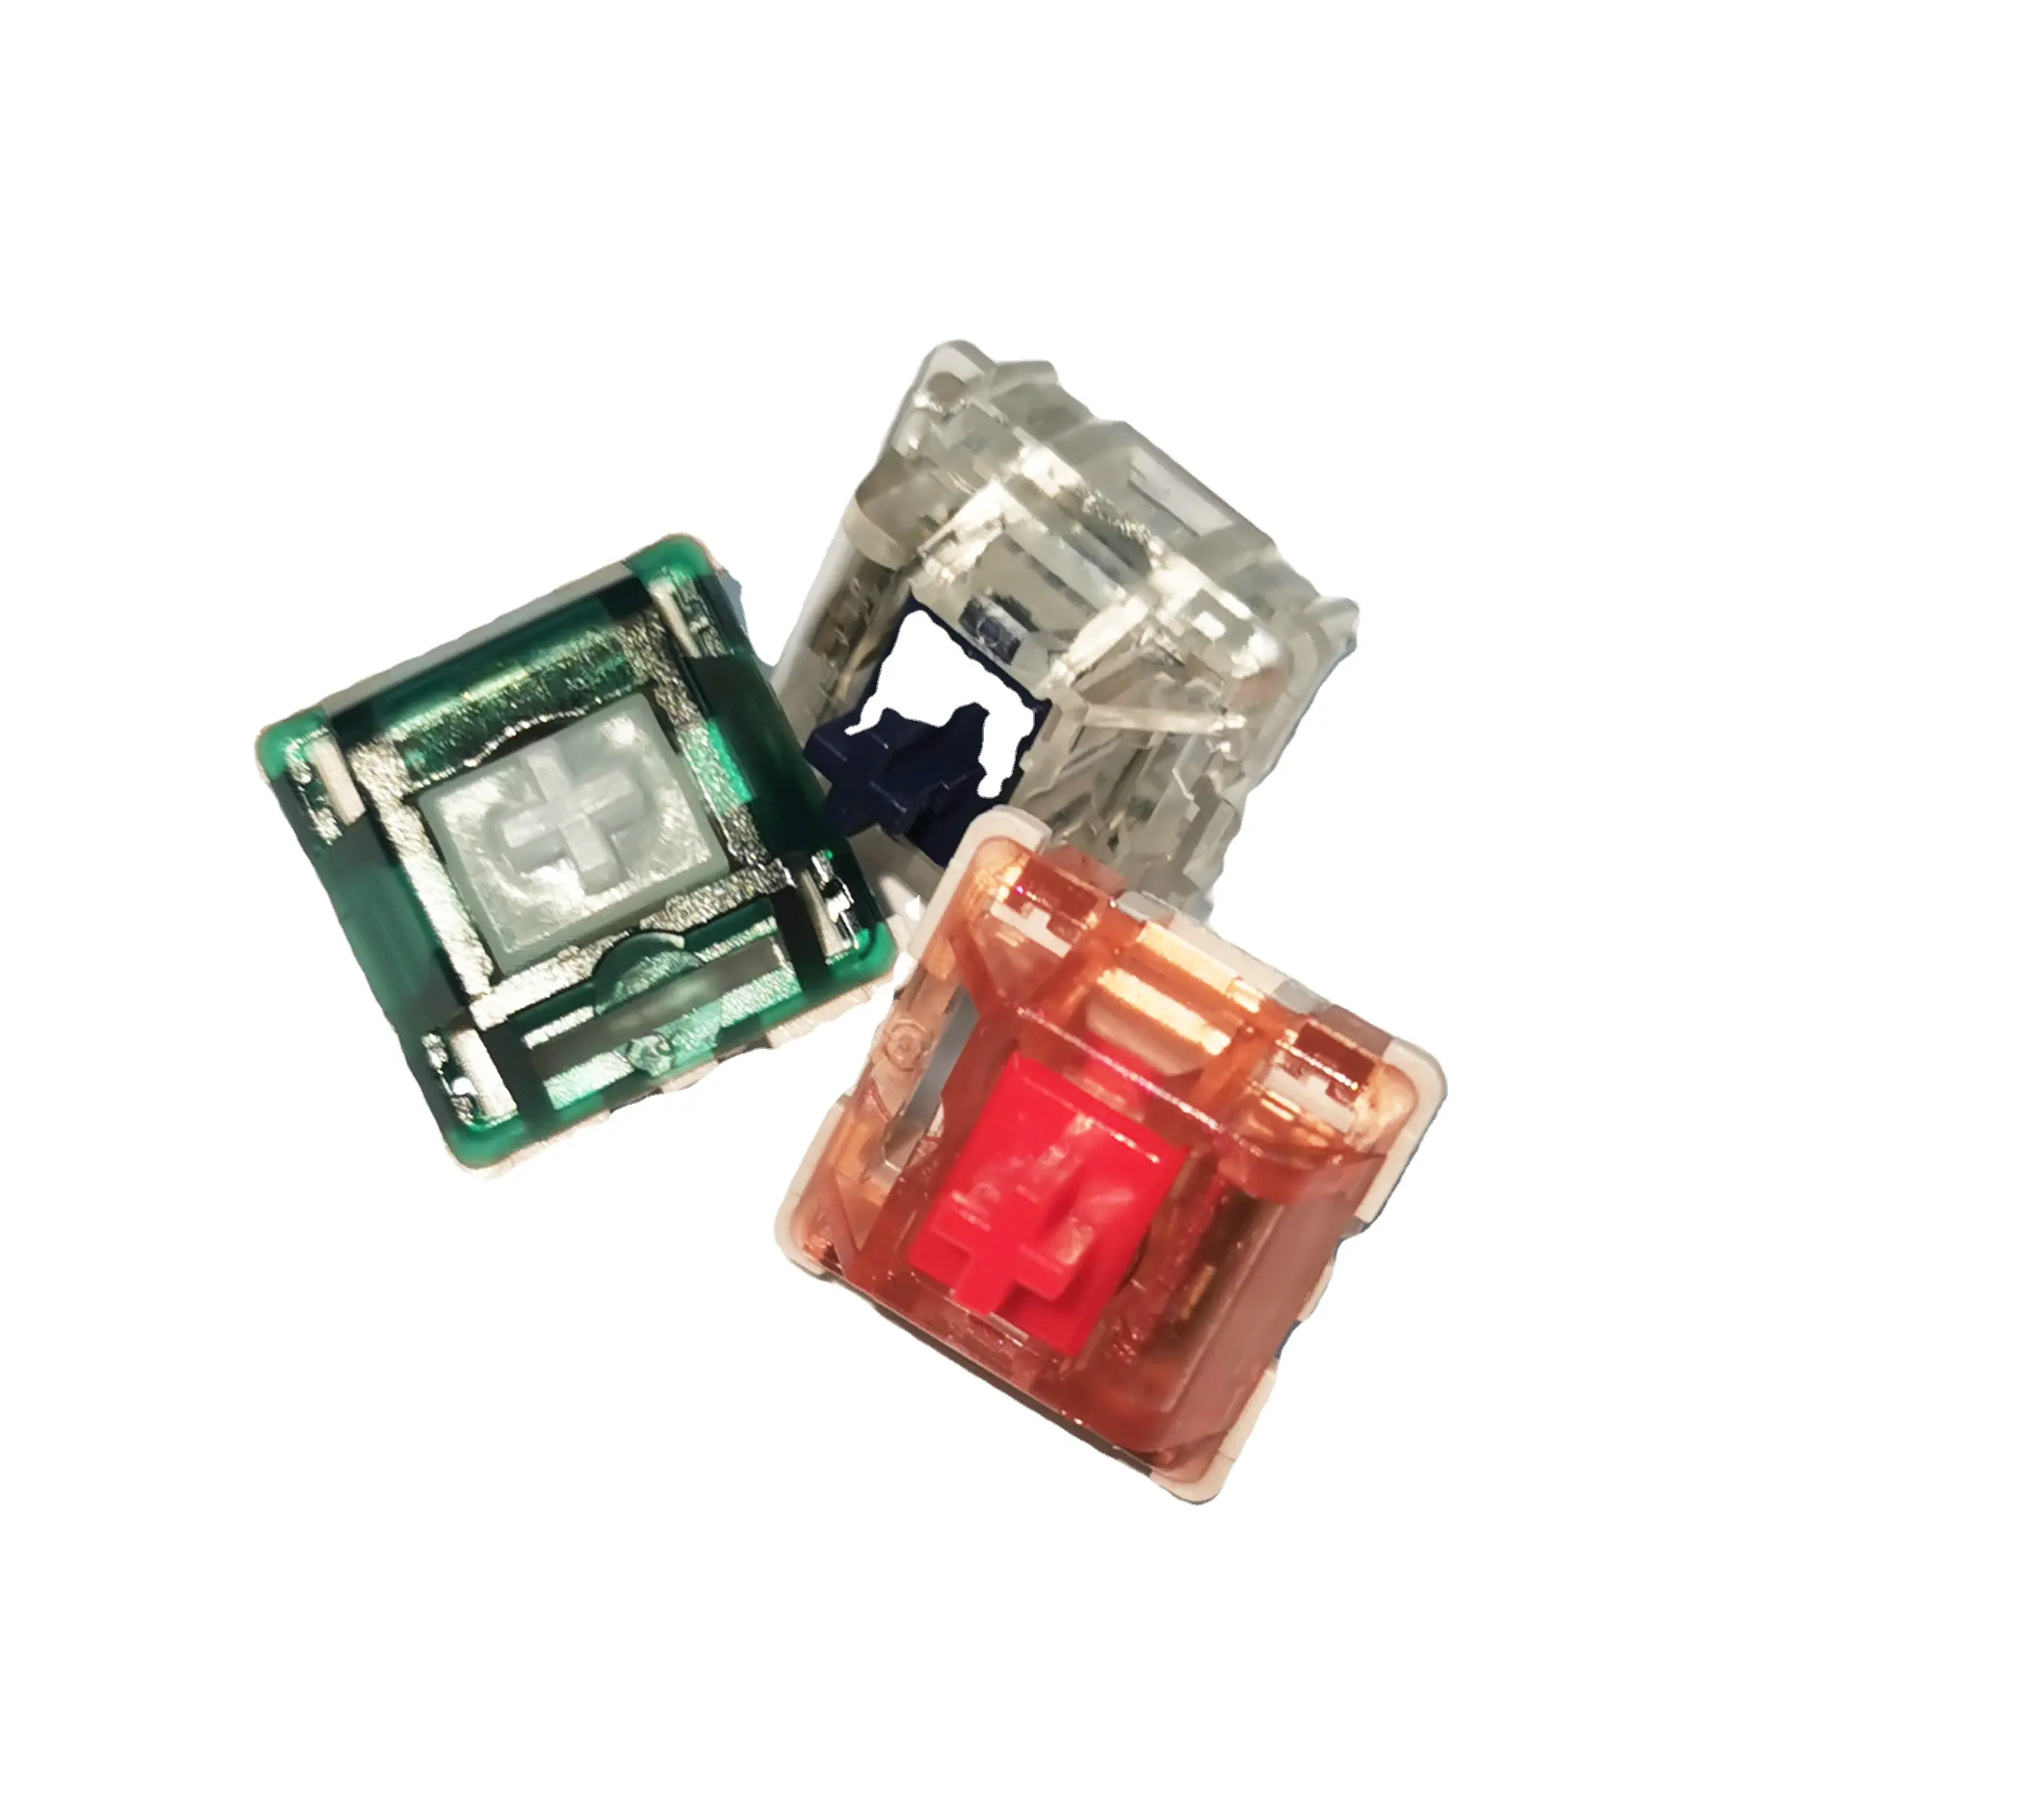 Cherry MX Switches RED Mechanical Switch Original Box Packing for Gaming Mechanical Keyboard